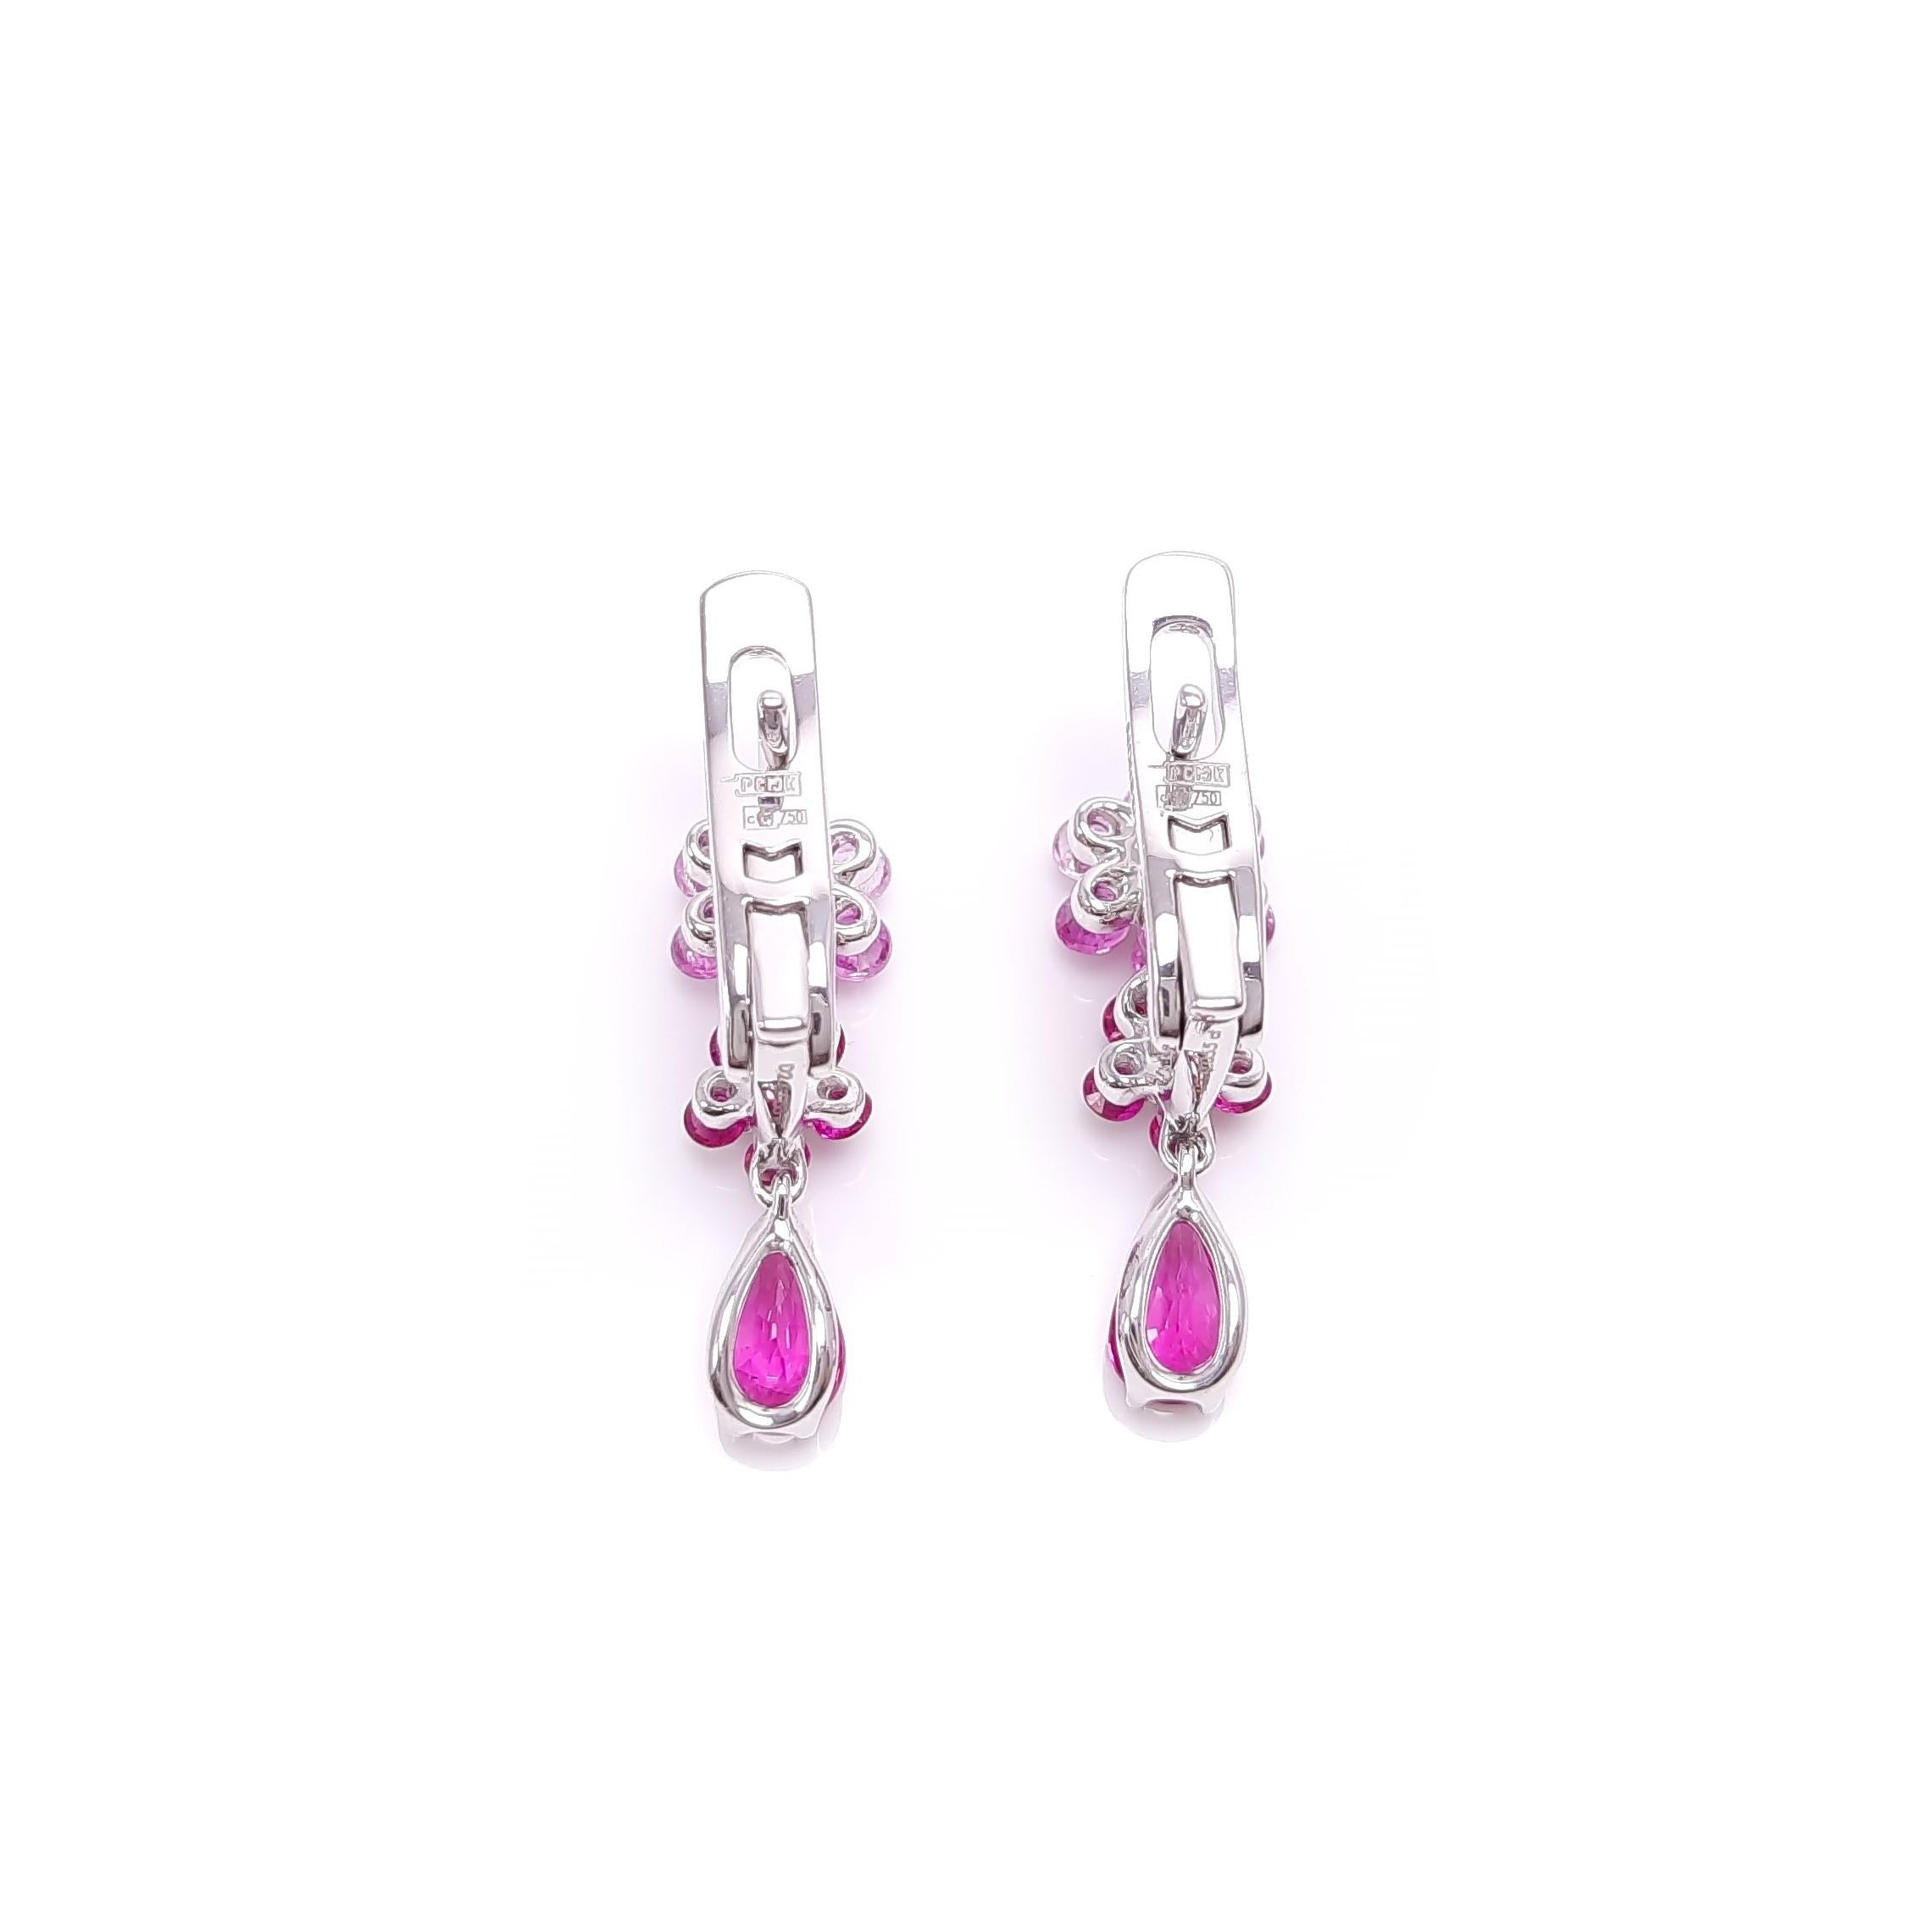 Contemporary Moiseikin 18k White Gold Ruby and Sapphire Earrings